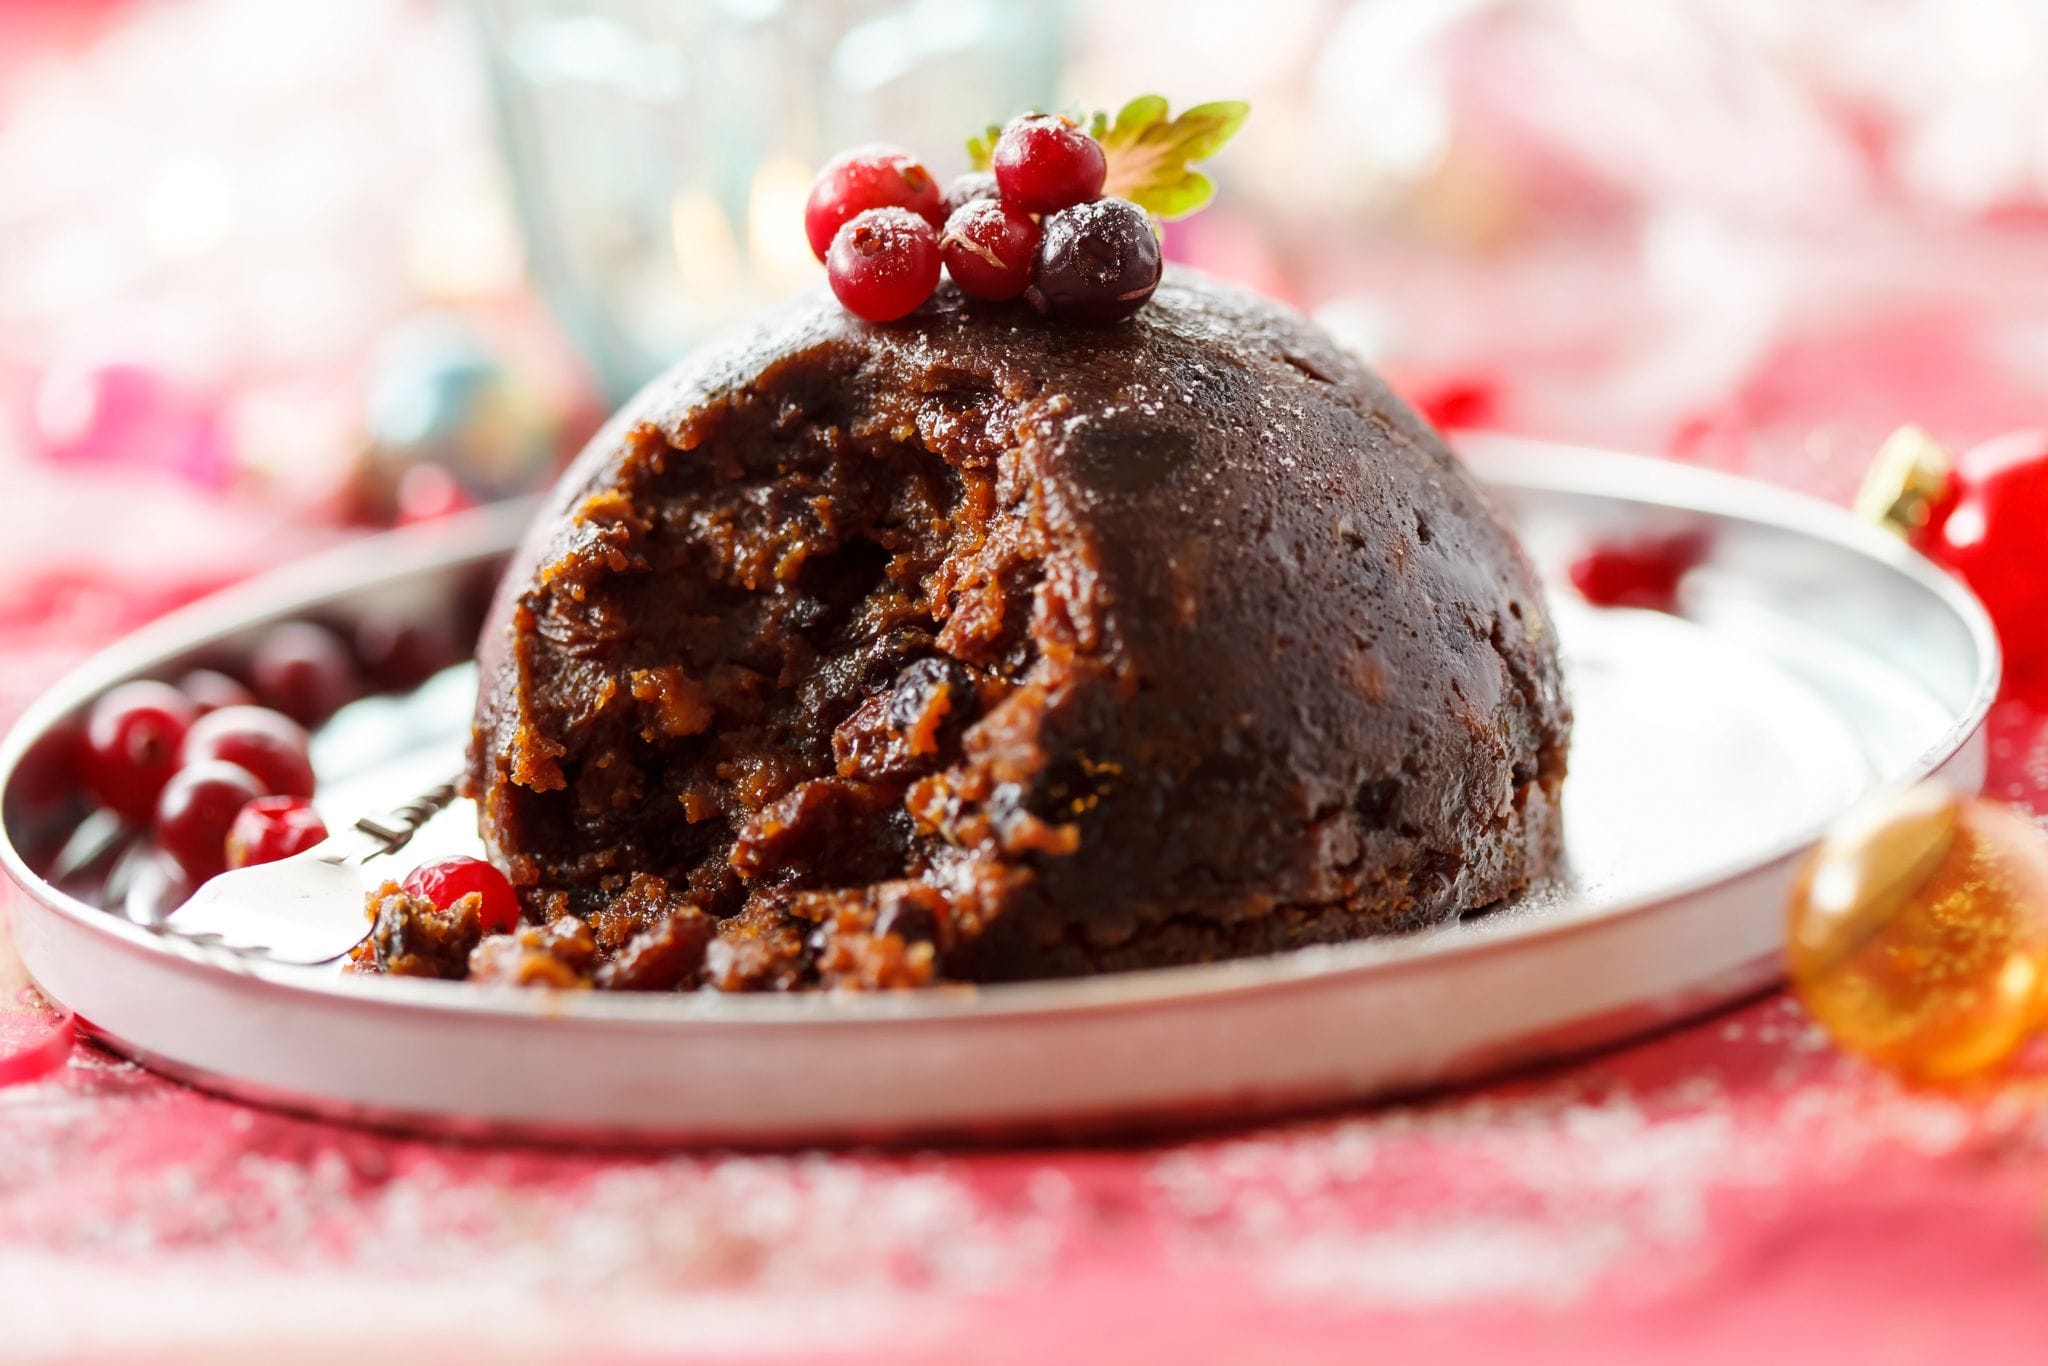 12. What is traditionally hidden inside a Christmas pudding?